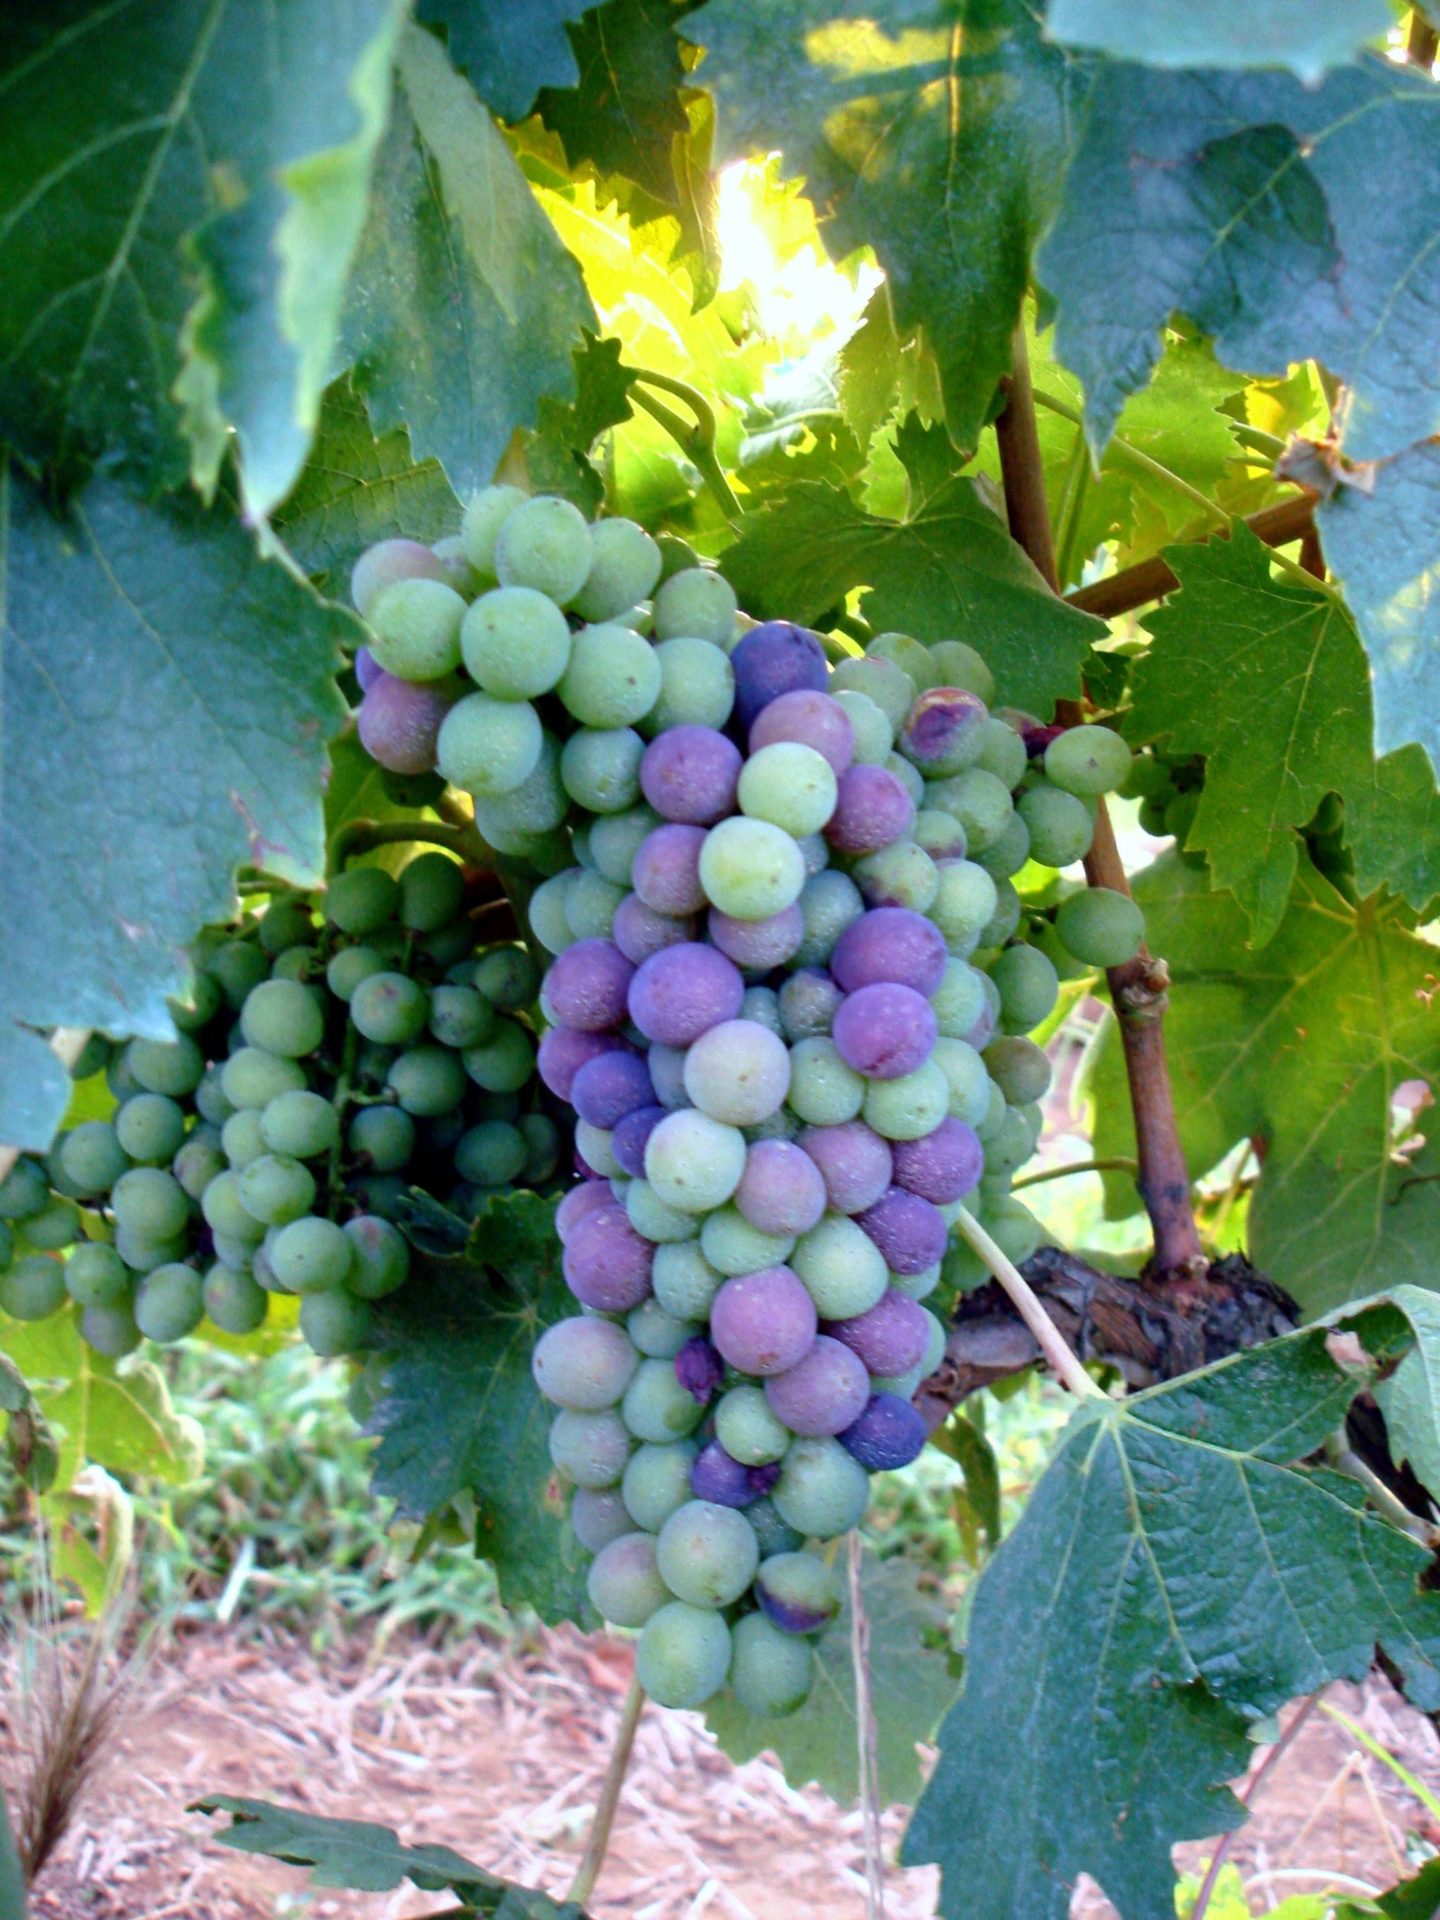 Sangiovese grapes from Enzo's vineyard in August